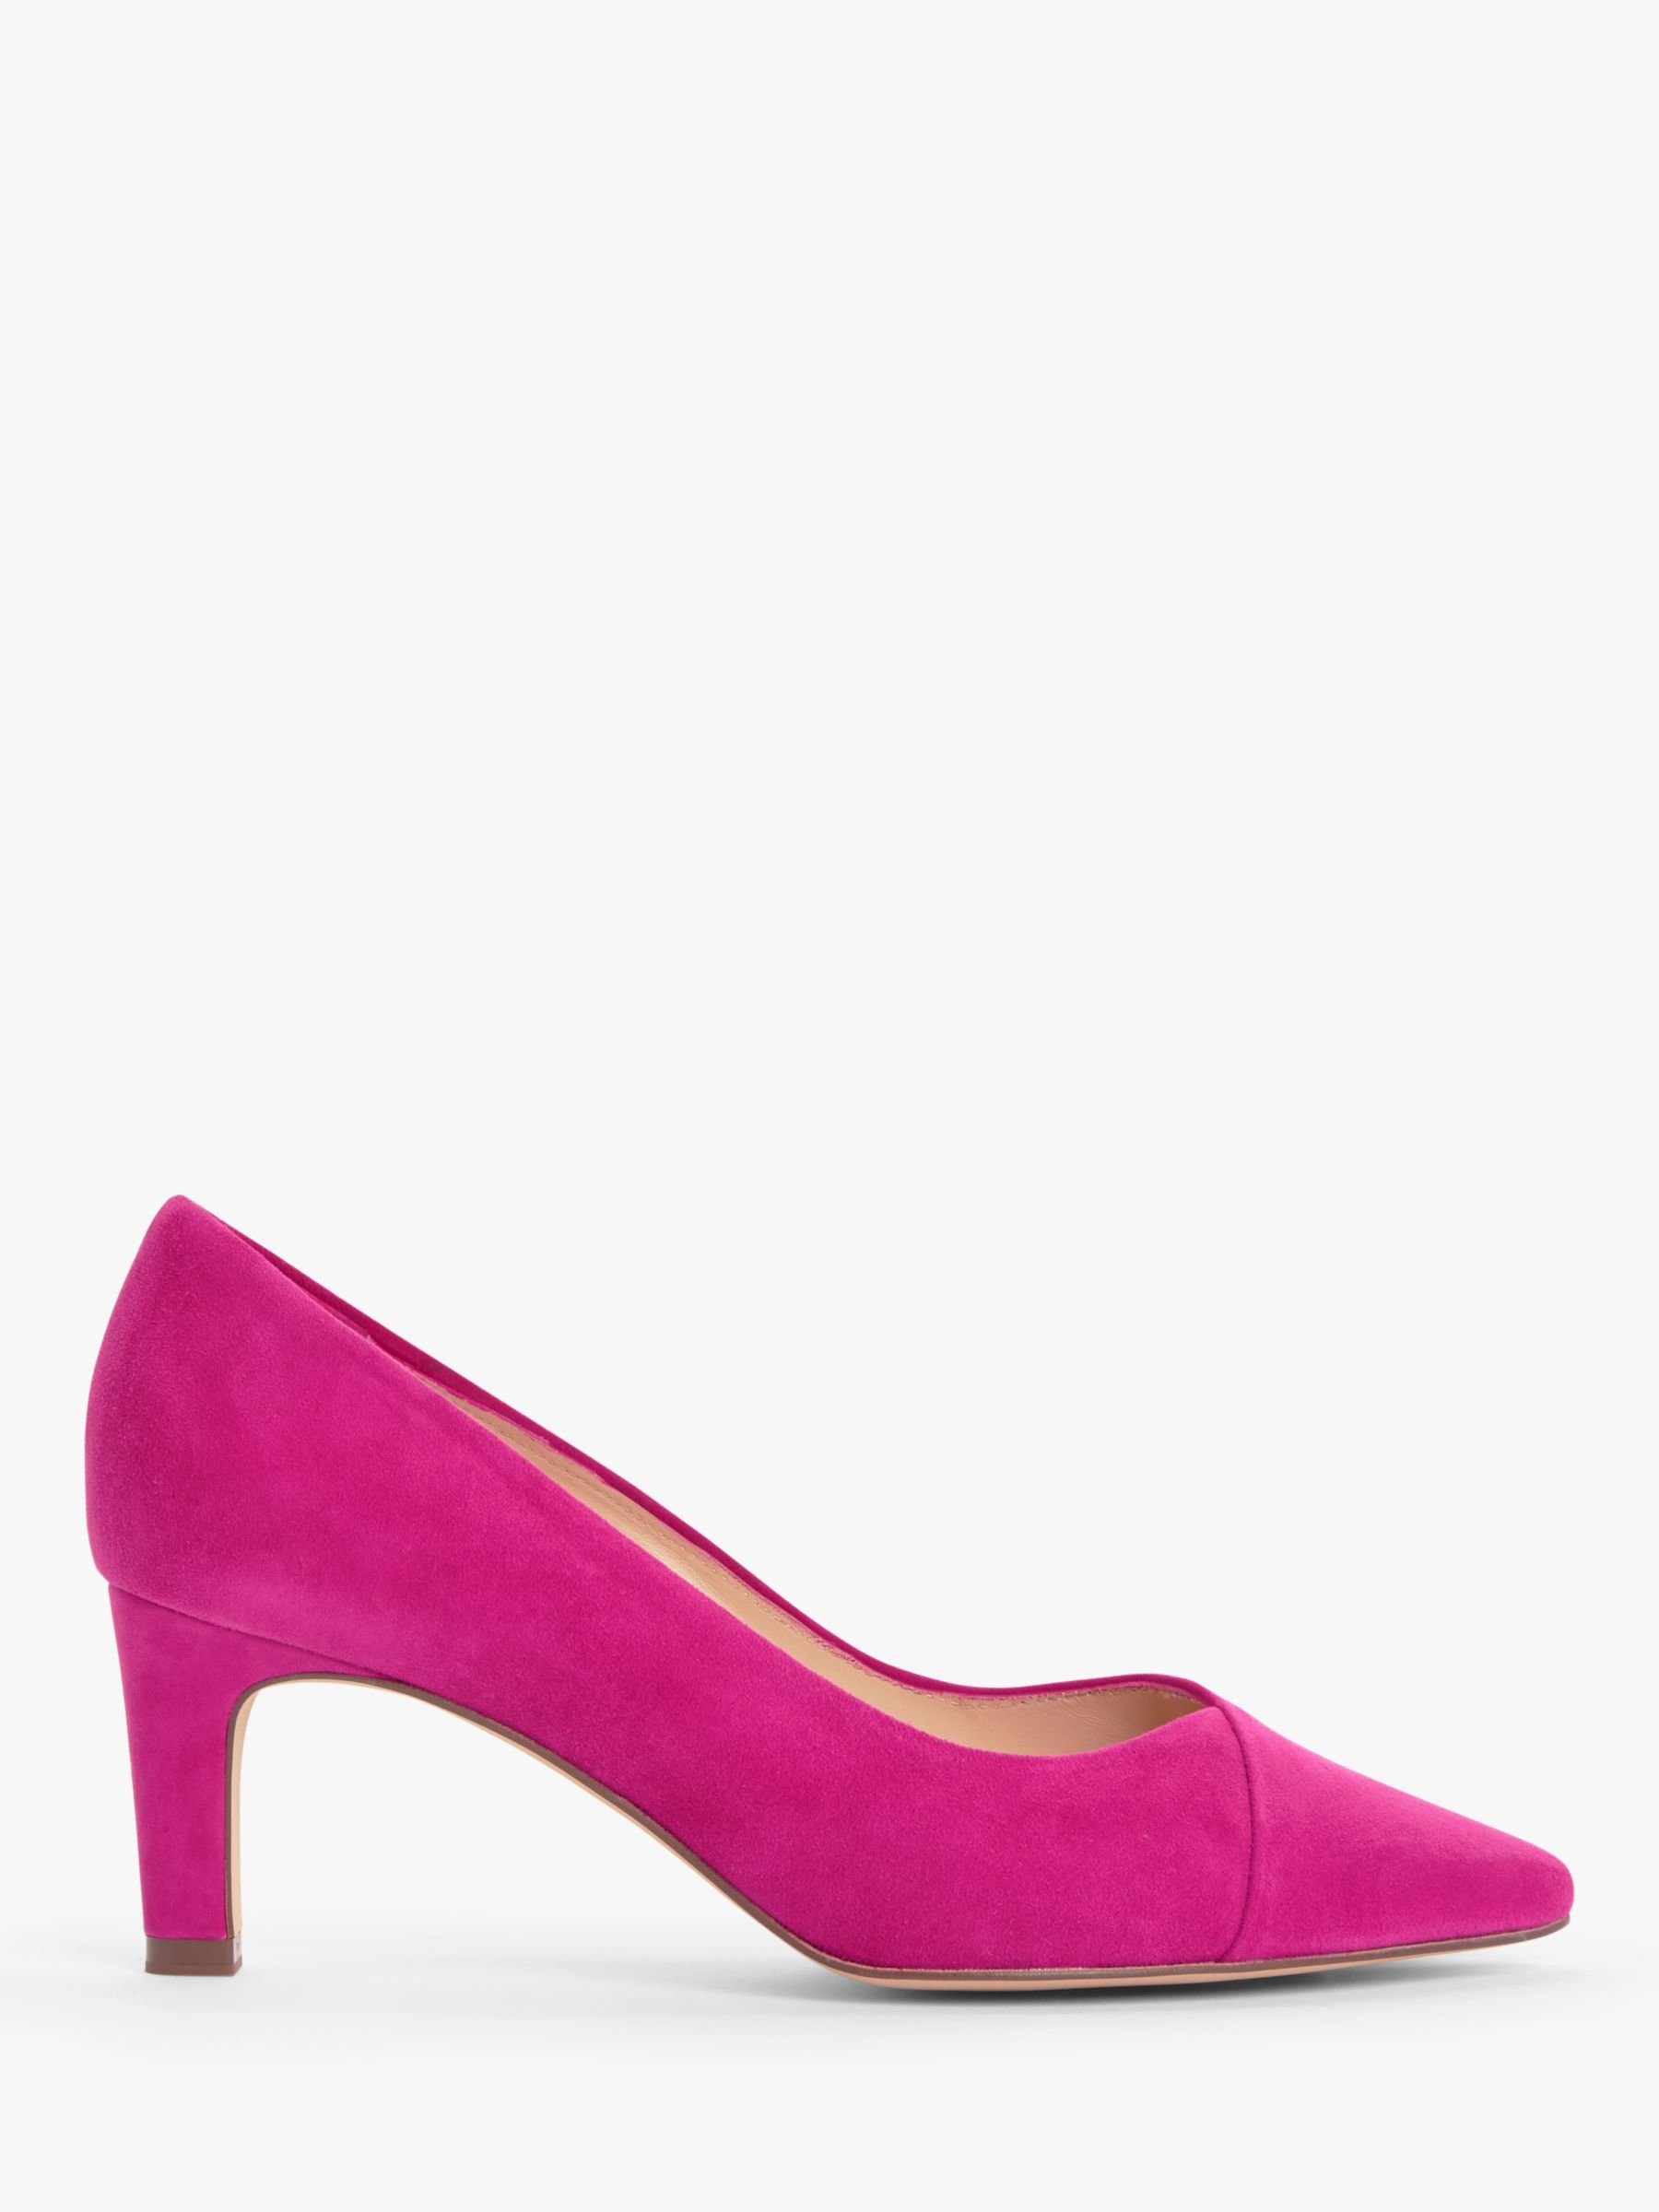 Peter Kaiser Maike Suede Court Shoes, Berry